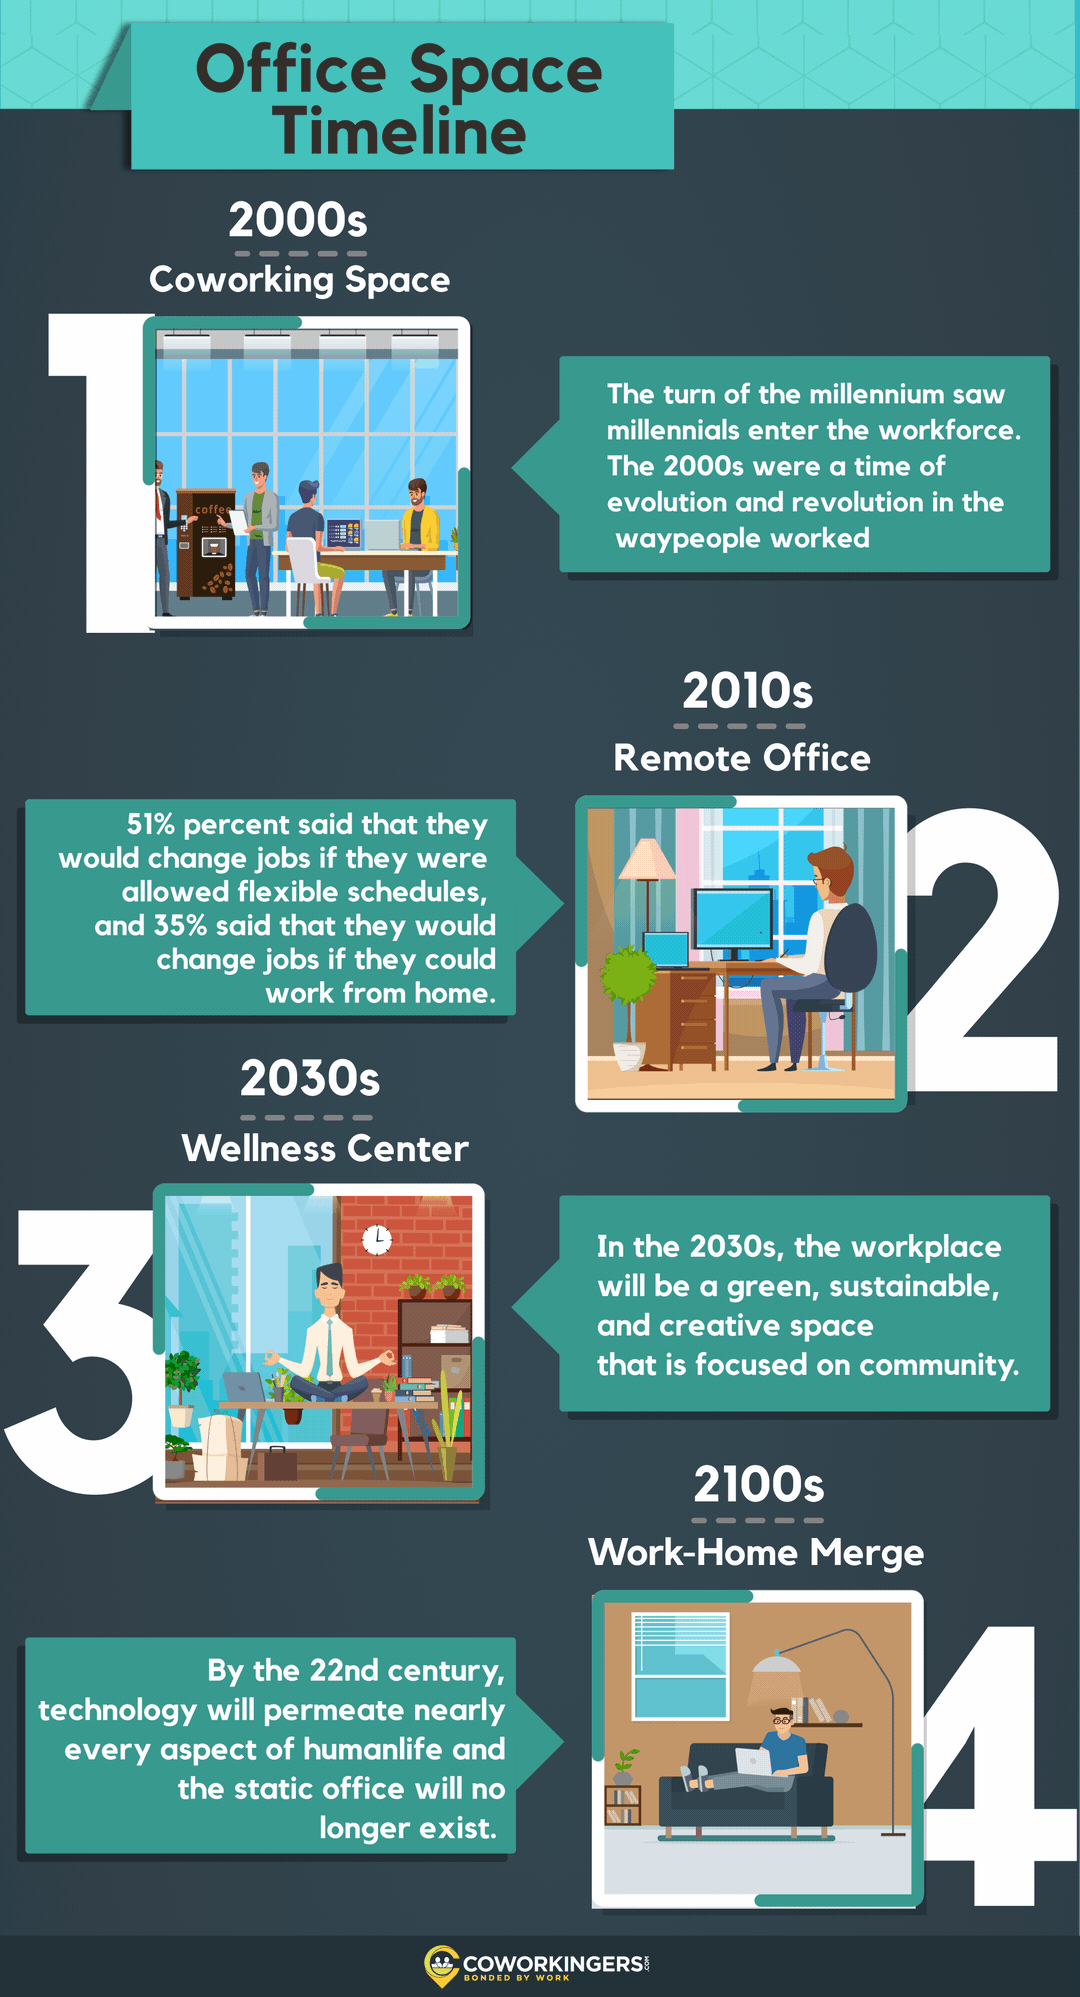 Office Space Timeline